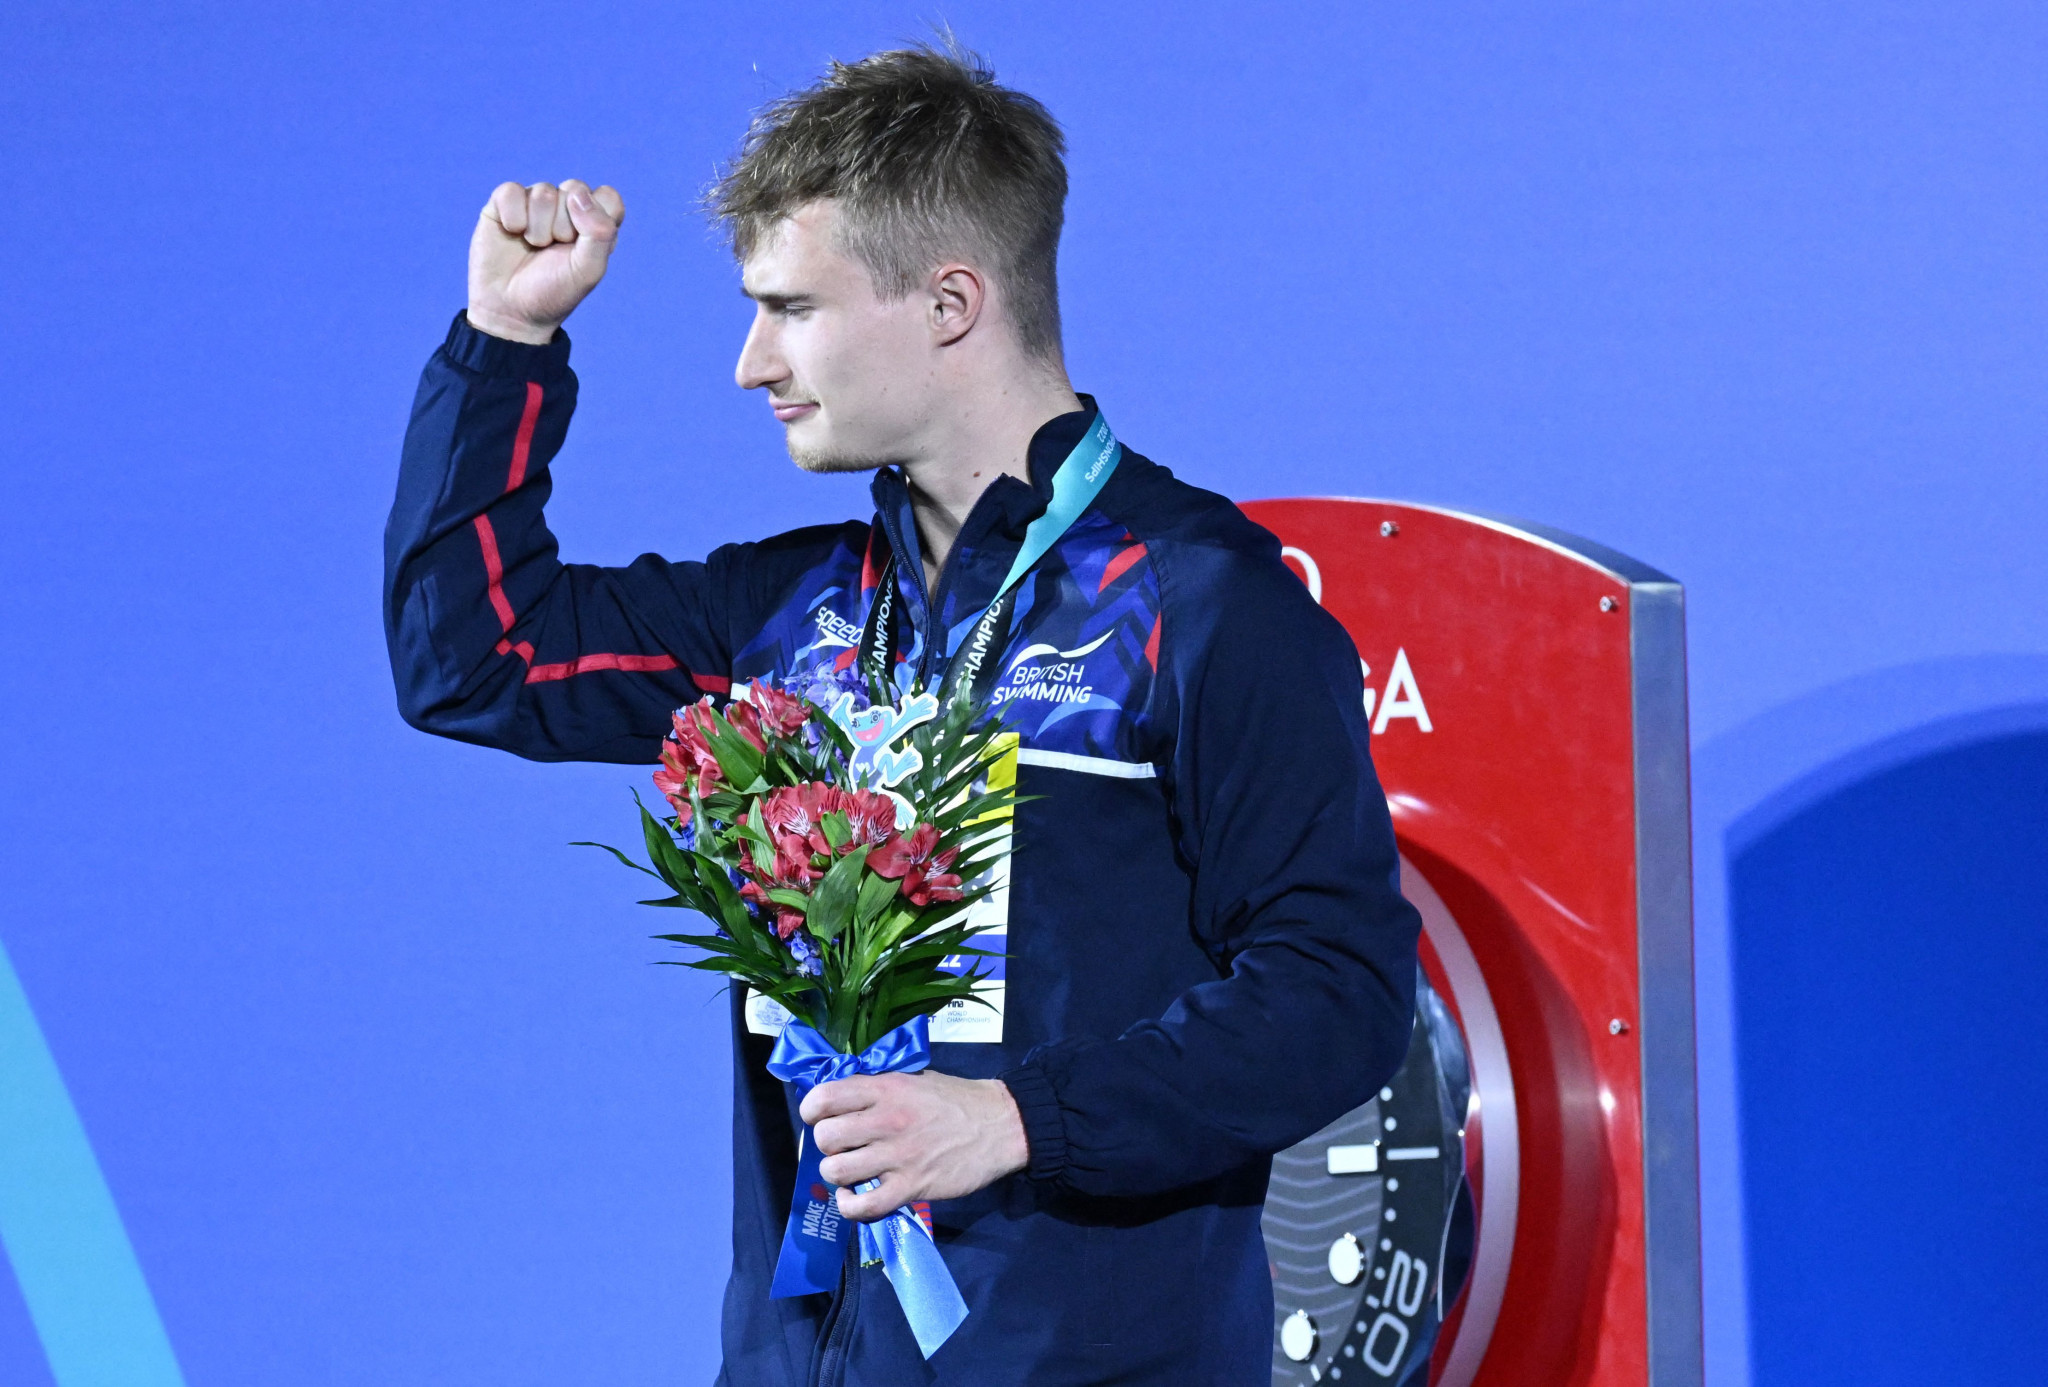 Newly elected FINA Athletes' Committee vice-chair Jack Laugher of Britain recovered from ranking ninth in the preliminary round to win men's 1m springboard silver ©Getty Images